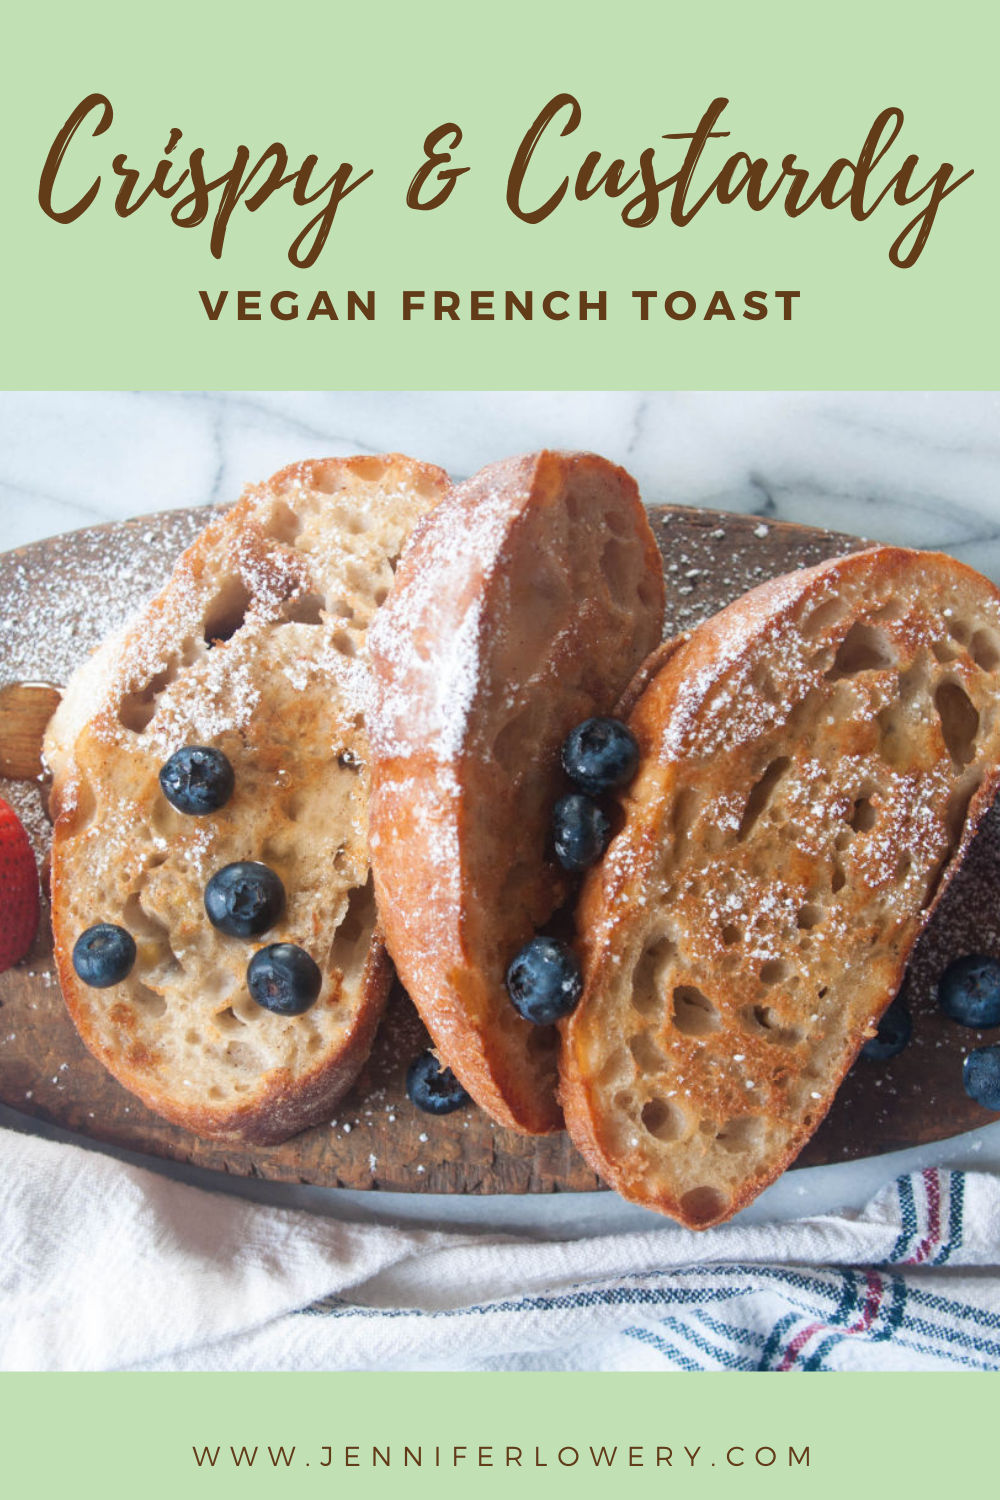 Pinterest pin of vegan french toast slices on a wooden board with berries